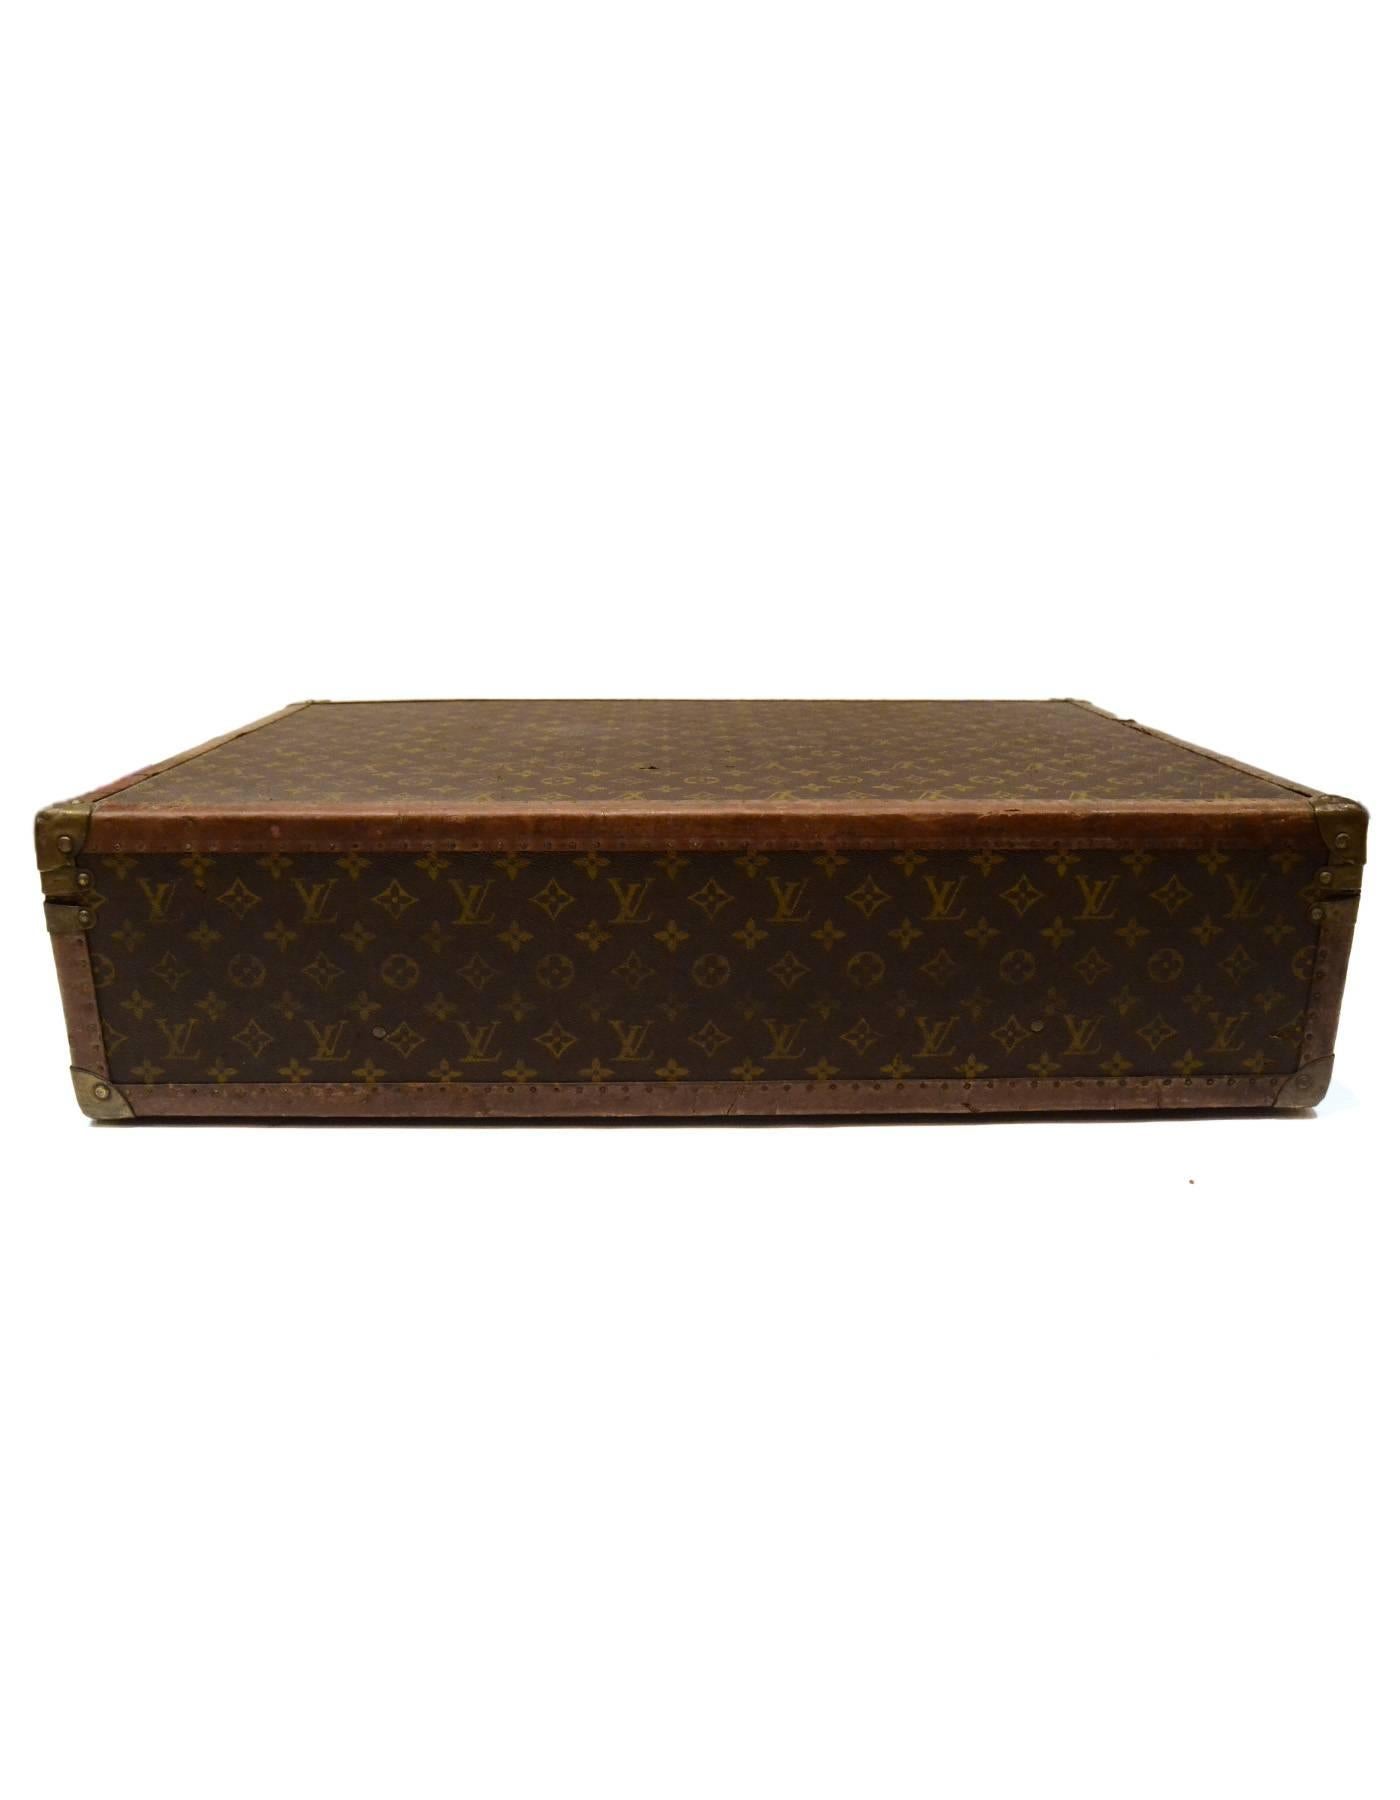 Louis Vuitton Vintage Monogram Hard Suitcase 

Made In: France
Color: Brown and tan
Hardware: Brass
Materials: Leather, metal and coated canvas
Lining: Beige canvas
Closure/Opening: Triple trunk latch closure
Exterior Pockets: None
Interior Pockets: